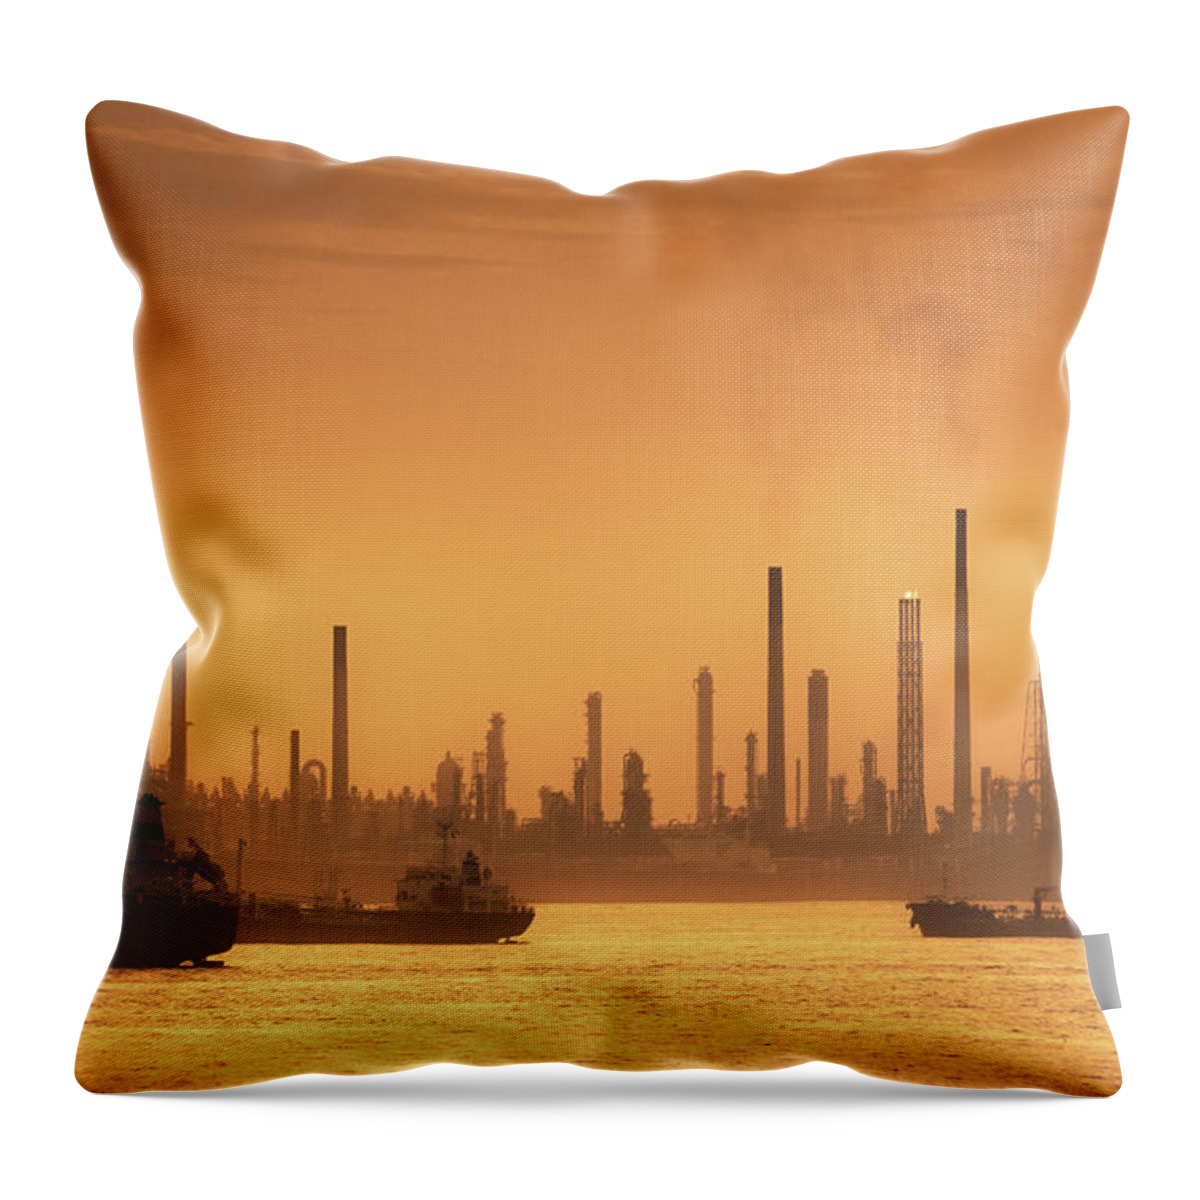 Scenics Throw Pillow featuring the photograph Silhouette Of Oil And Gas Production by D3sign